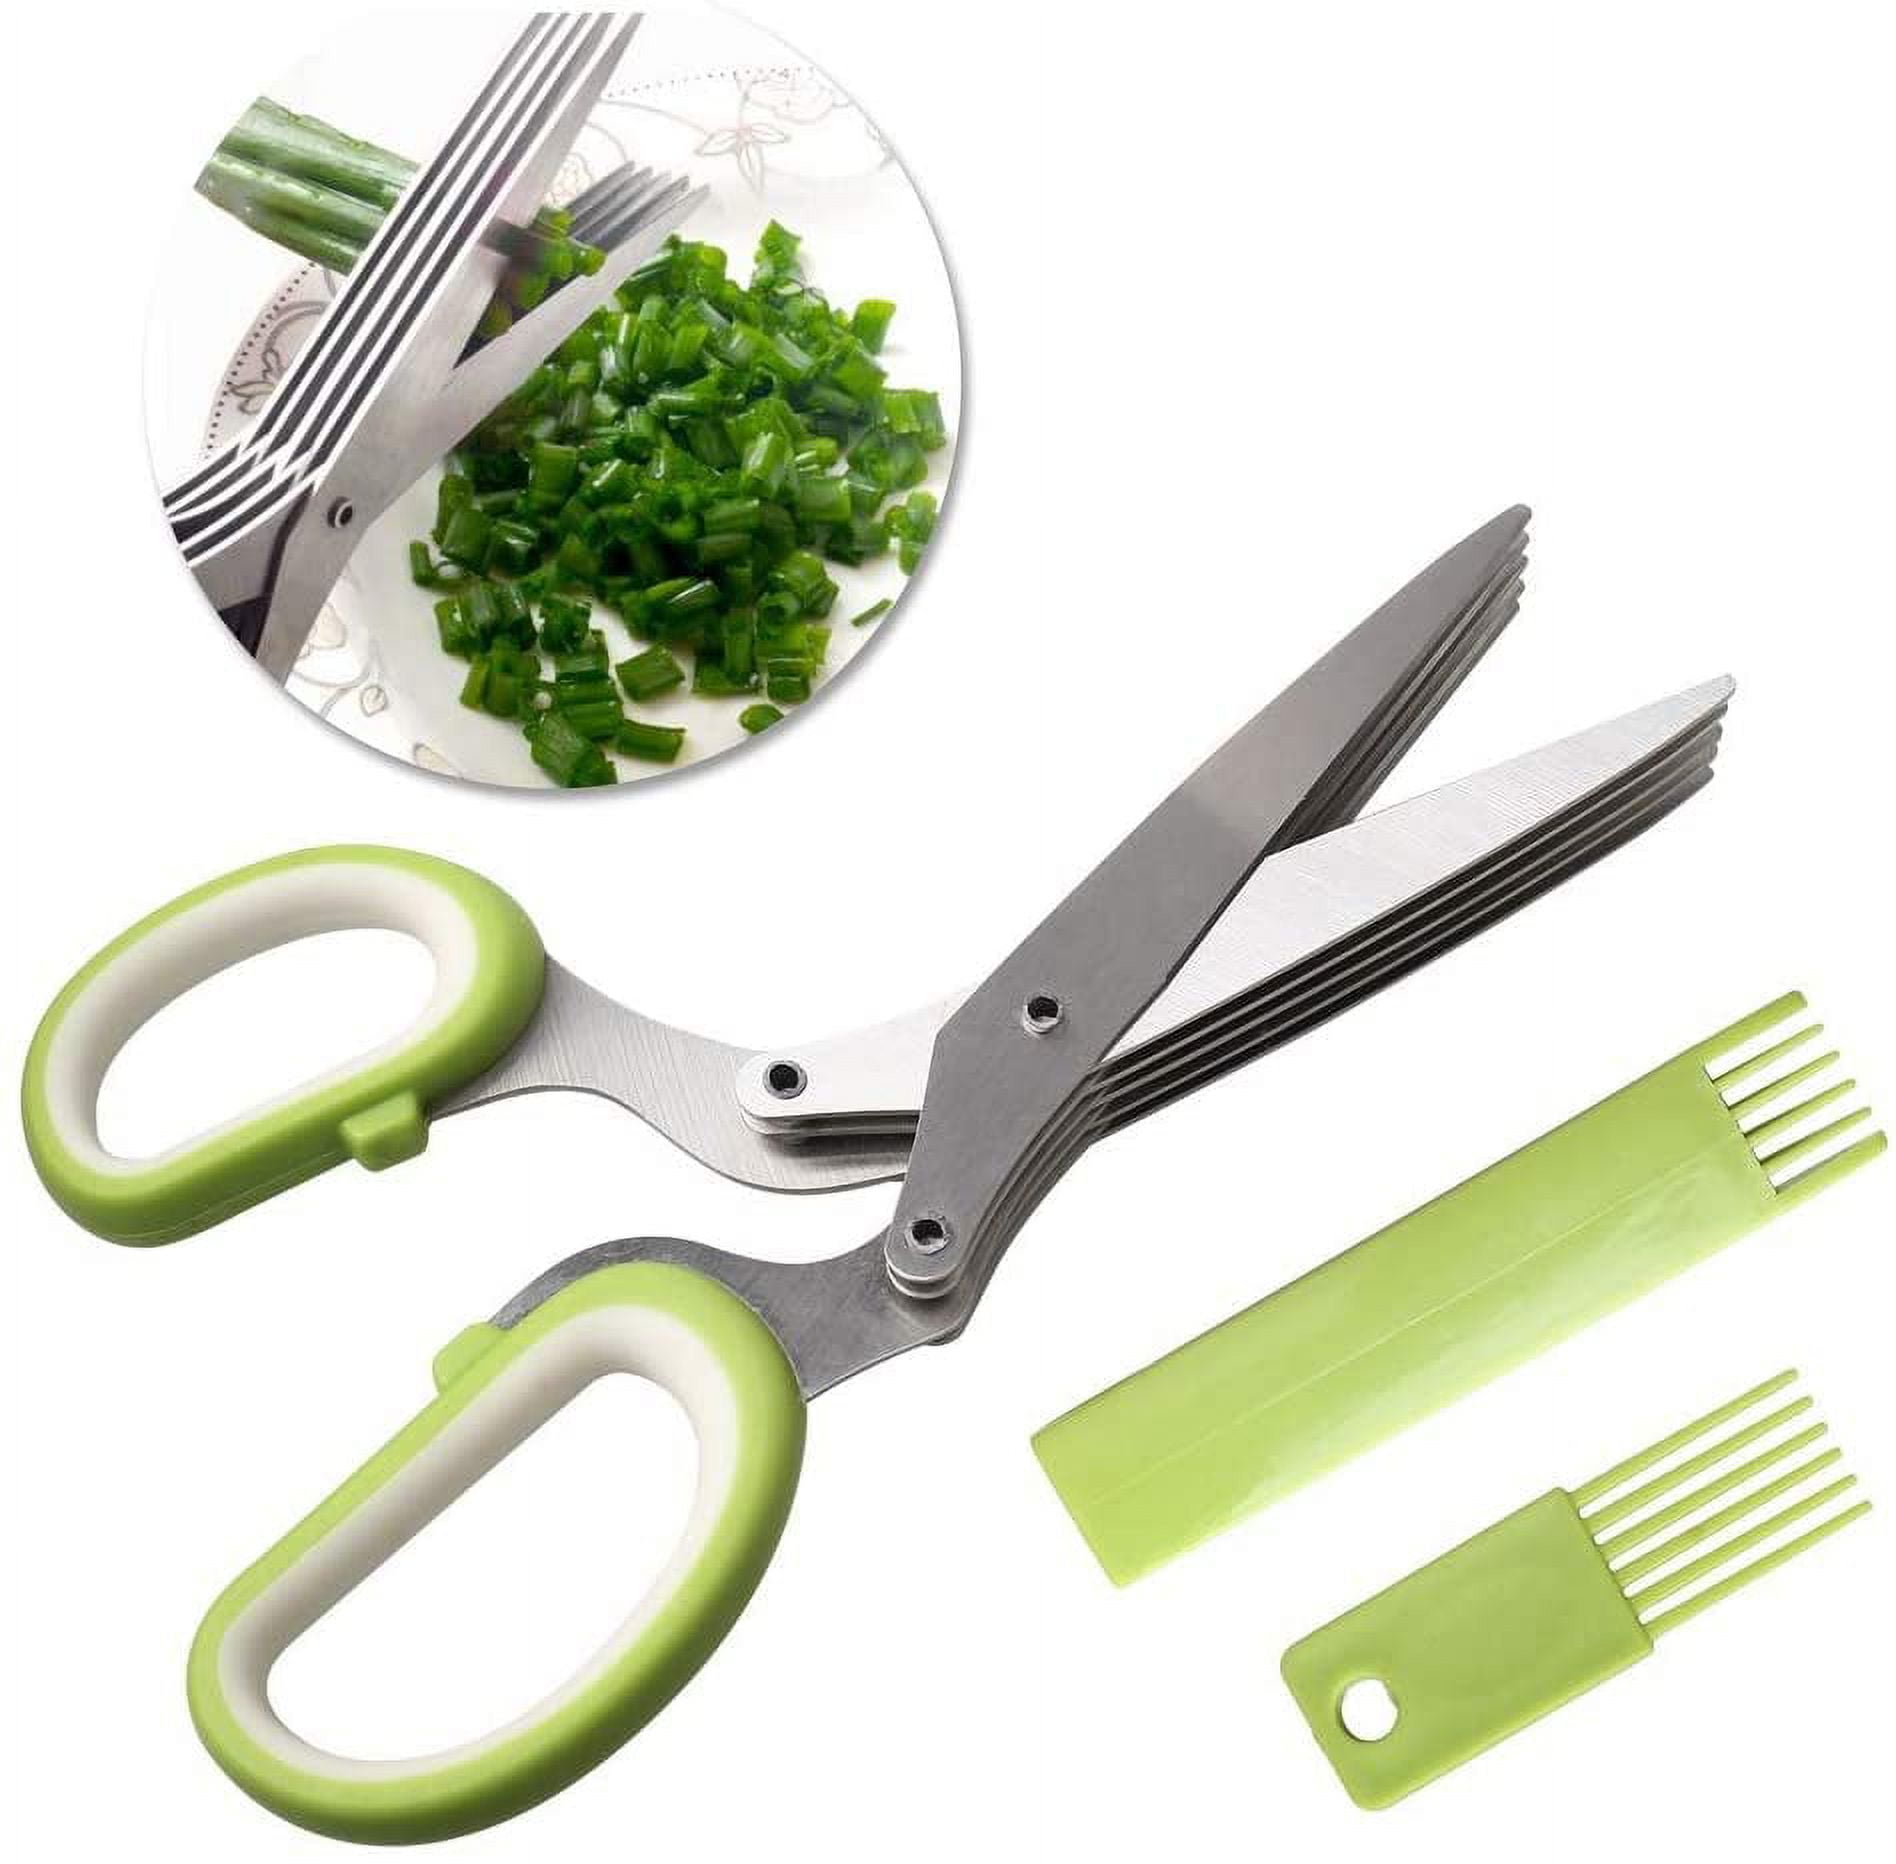 AWinjoy Herb Scissors Set,Multipurpose 5 Blade Kitchen Herb Cutter with  Safety Cover and Cleaning Comb for Cutting Shredded Lettuce, Cilantro  Fresh